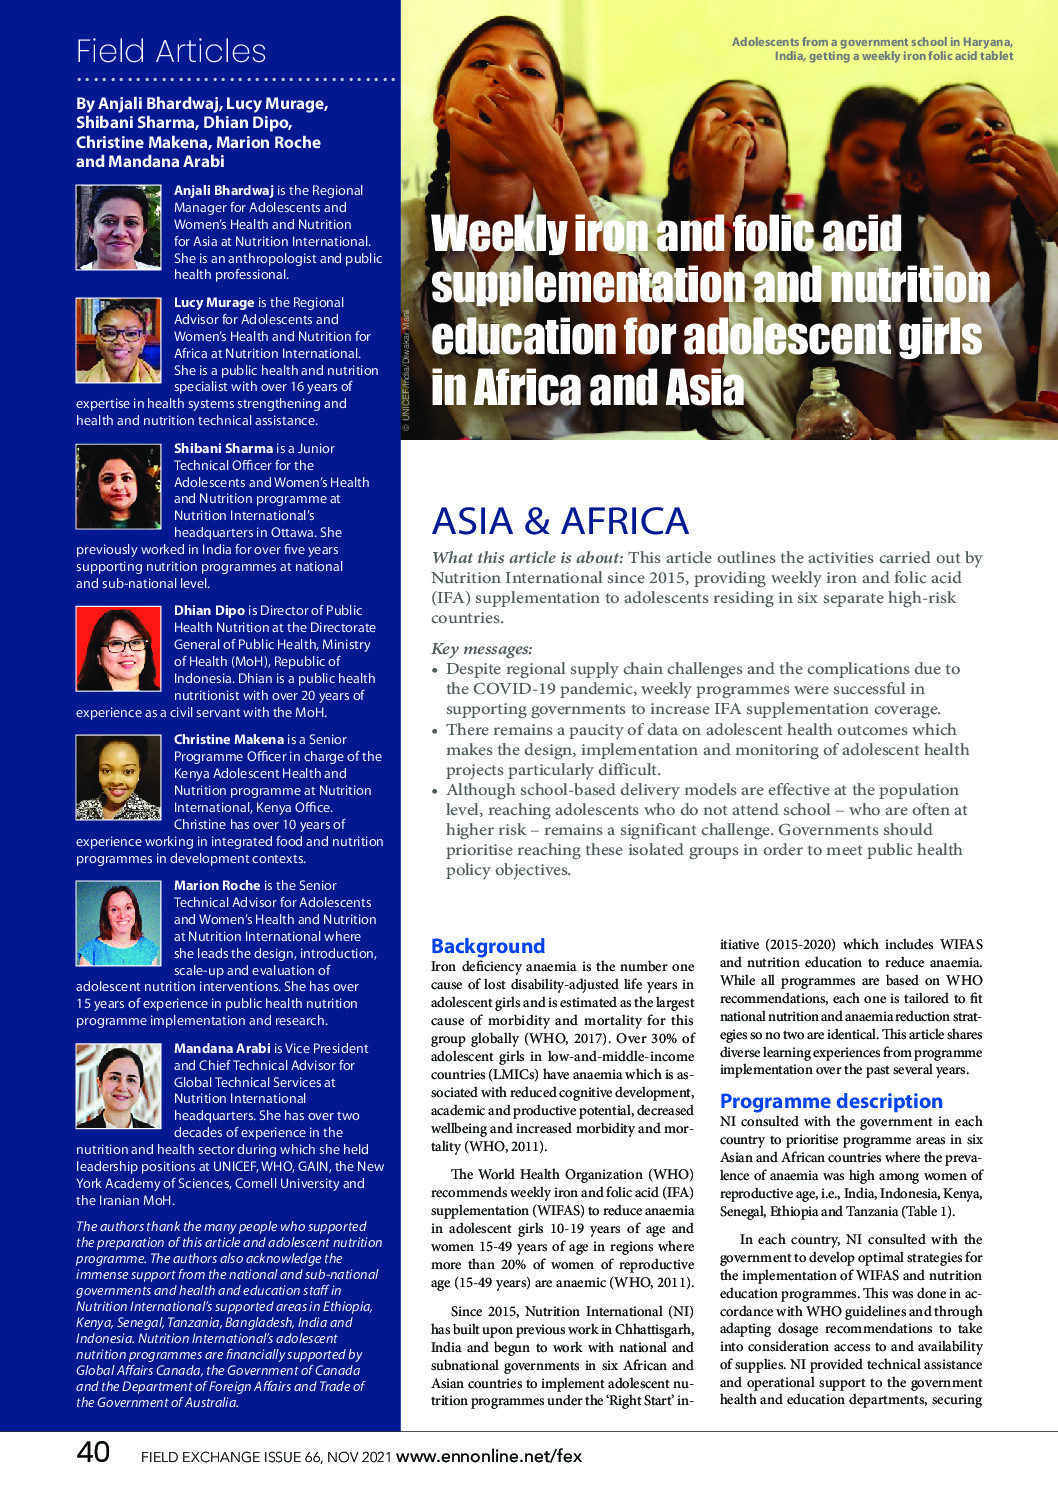 Weekly iron and folic acid supplementation and nutrition education for adolescent girls in Africa and Asia thumbnail